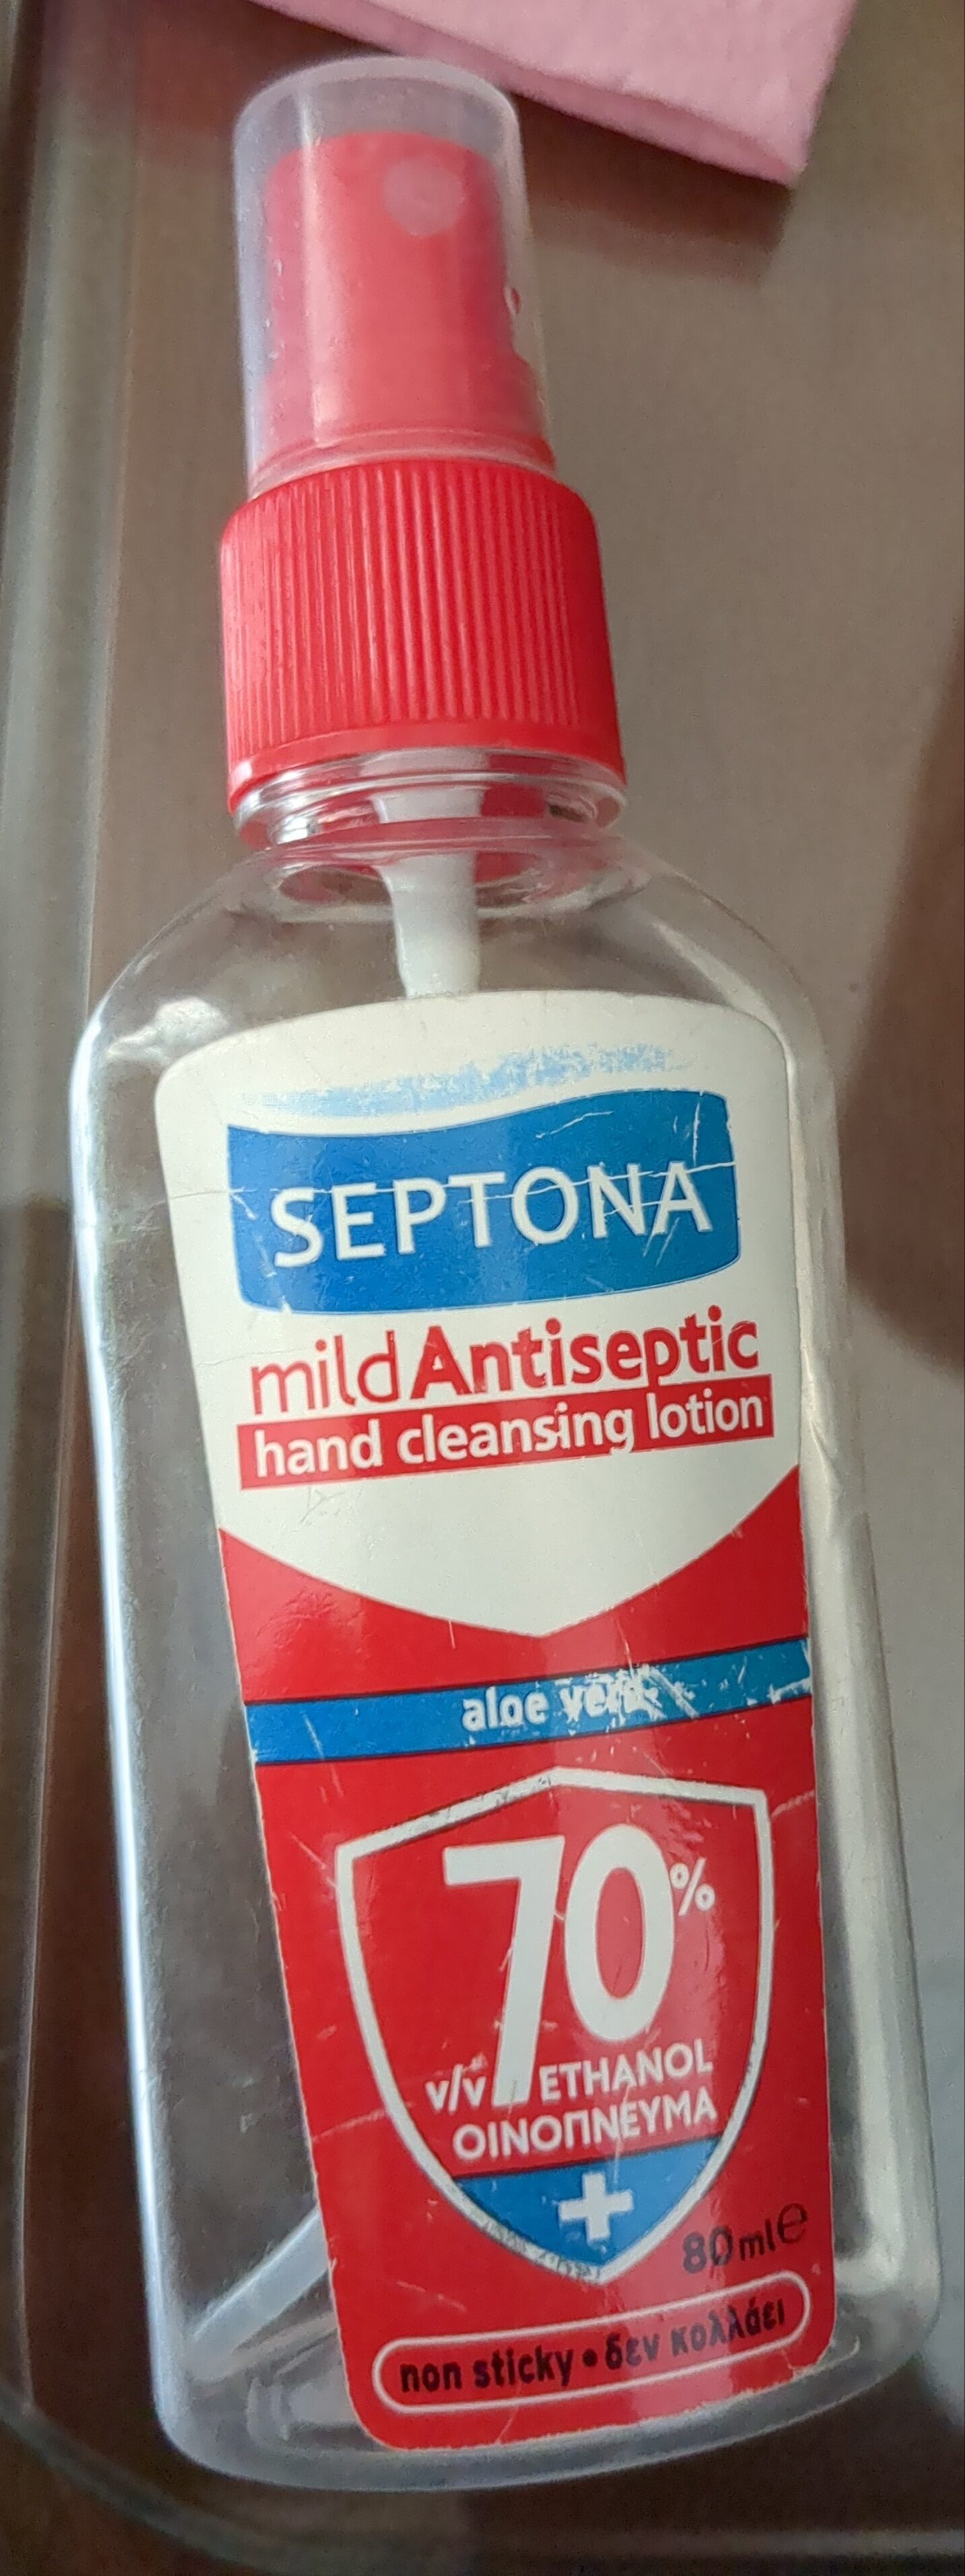 mild Antiseptic hand cleansing lotion - Tuote - en